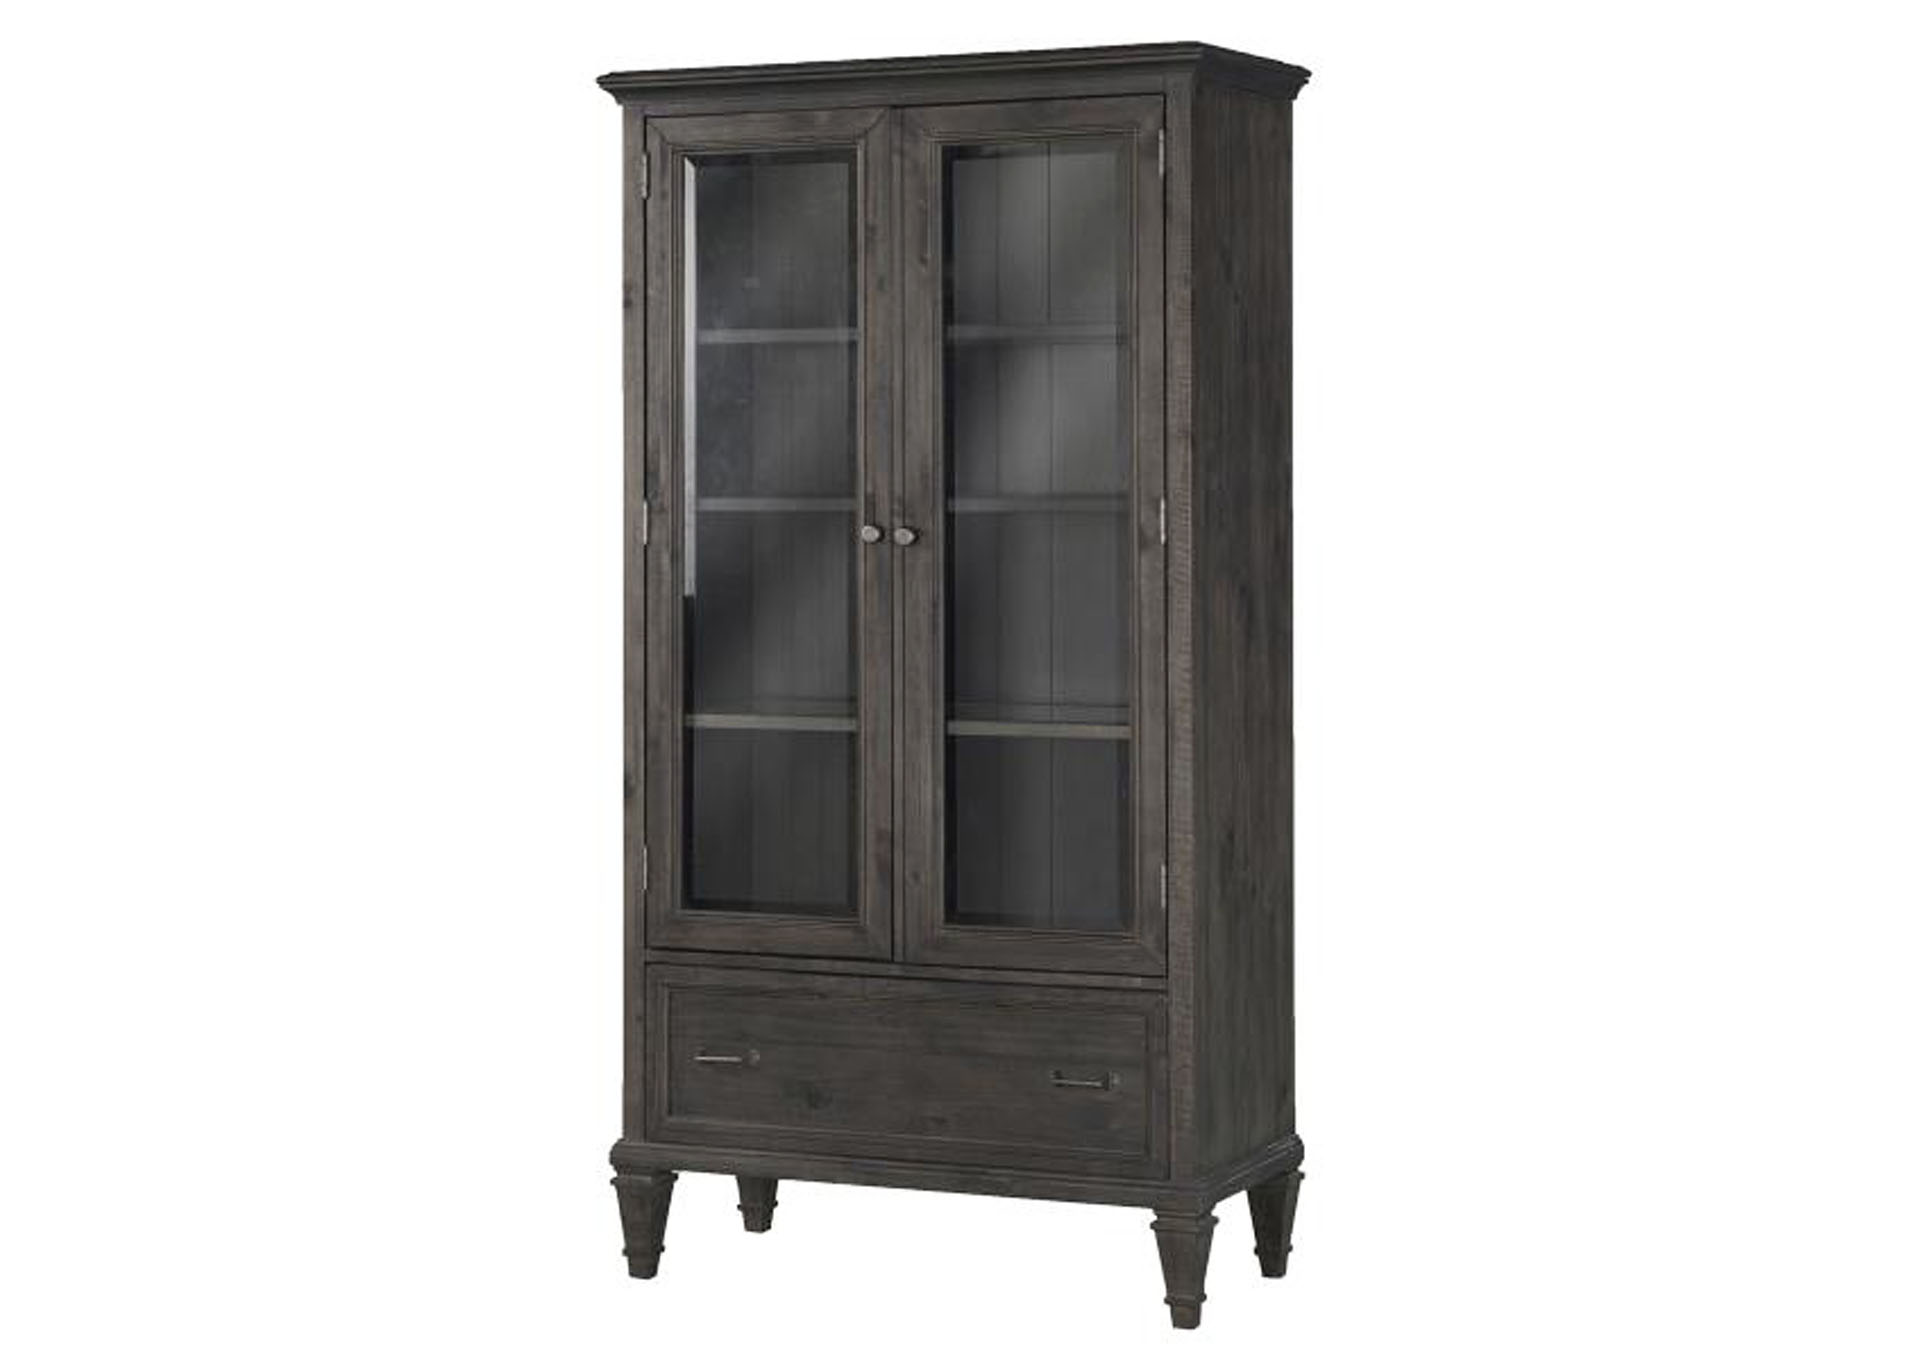 Sutton Place Weathered Charcoal Door Bookcase,Magnussen